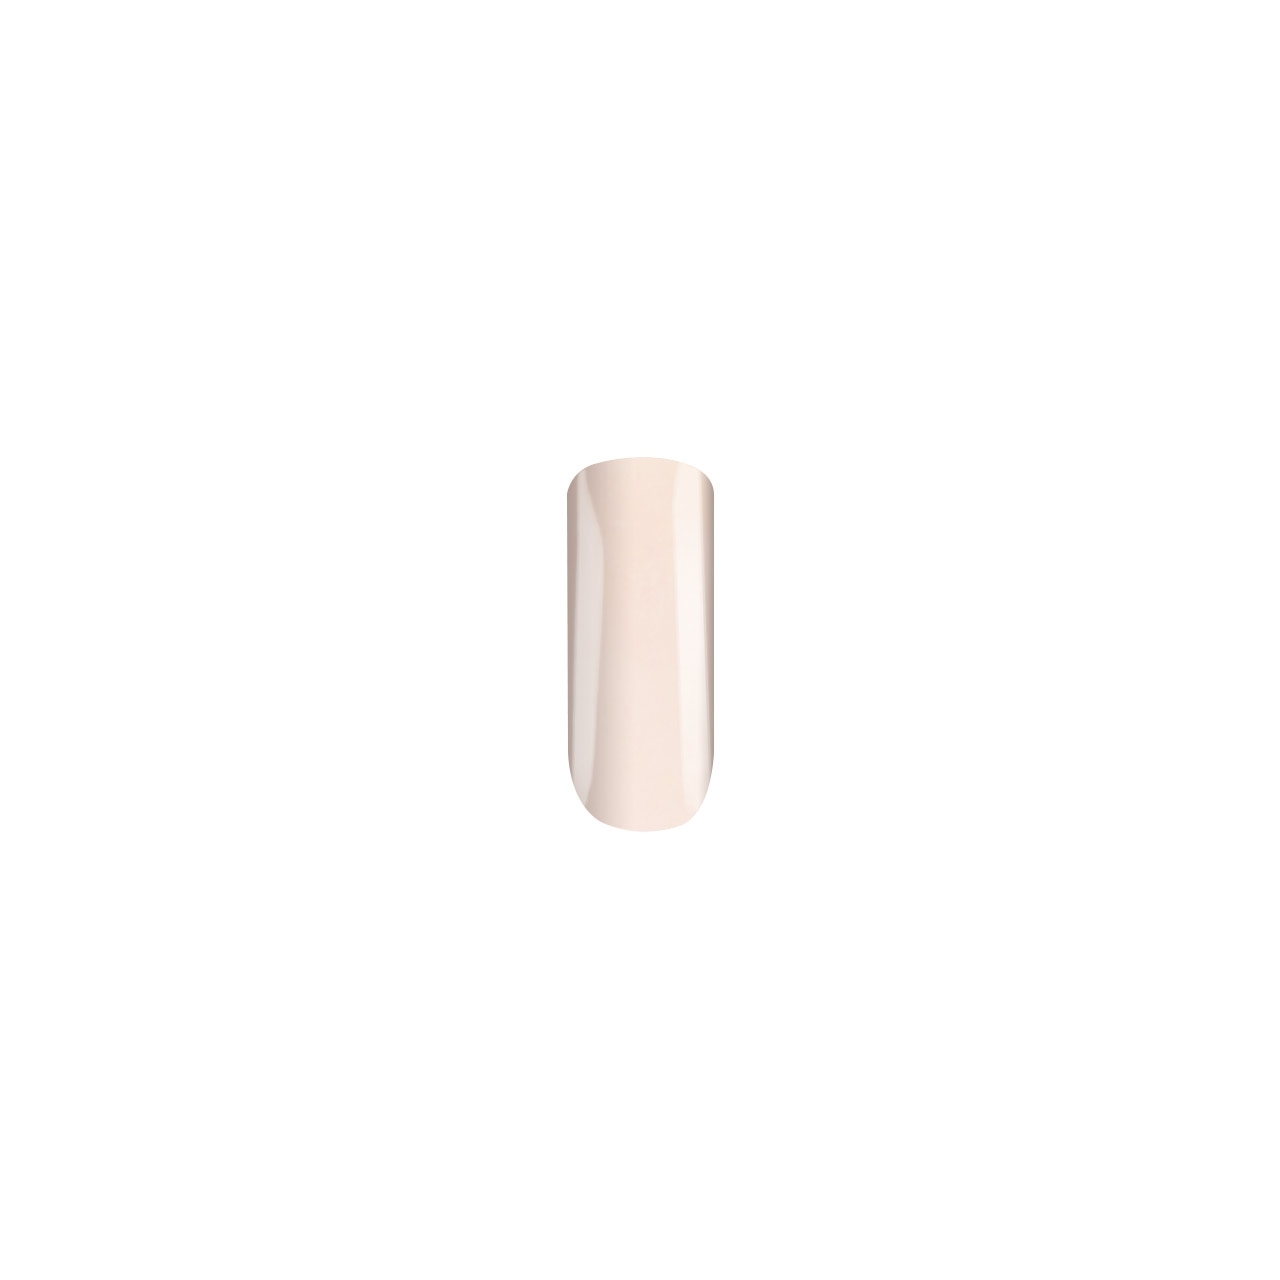 BAEHR BEAUTY CONCEPT - NAILS Nagellack pearl rose pearl 11 ml